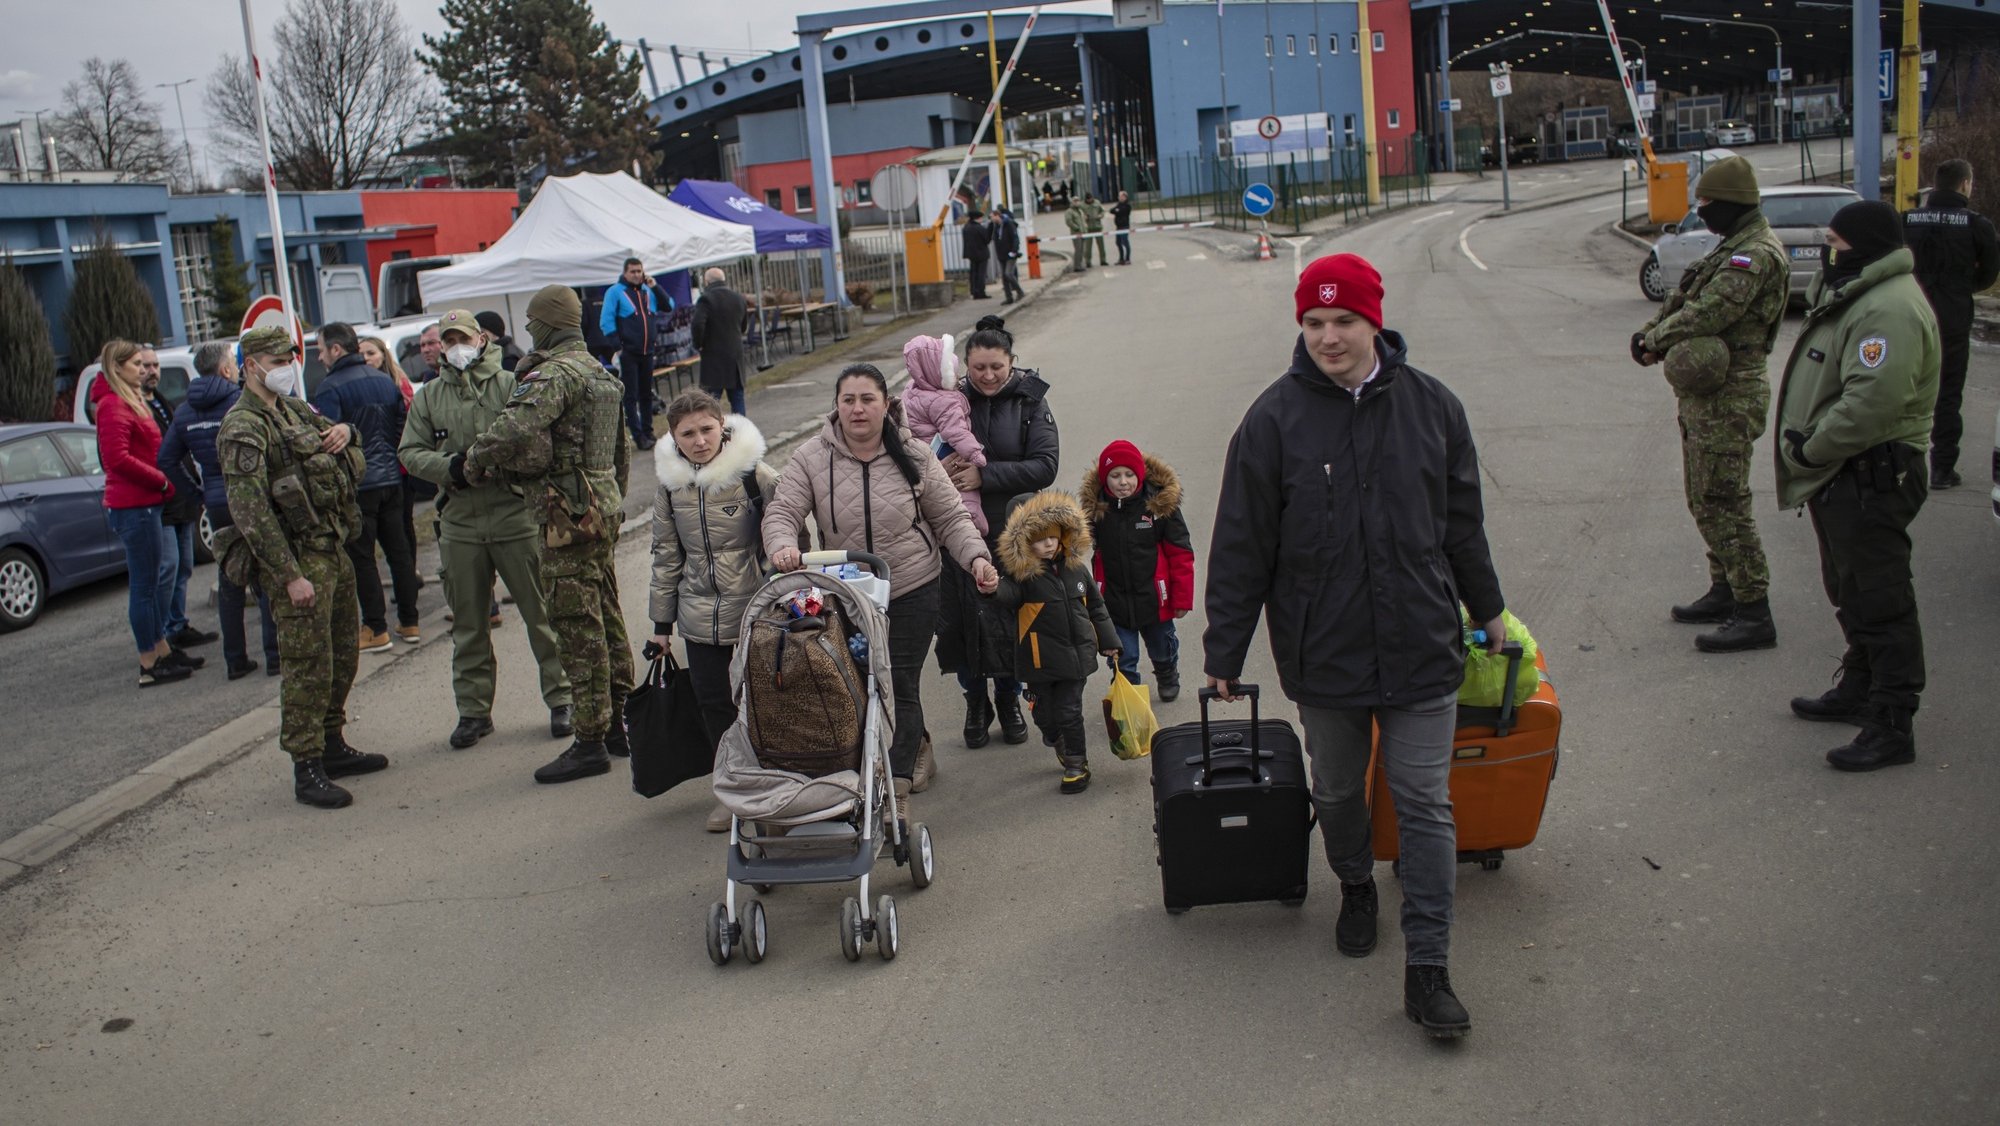 epa09786723 People fleeing Ukraine arrive to Slovakia, at border crossing in Vysne Nemecke, Slovakia, 26 February 2022. Slovakia said it will let fleeing Ukrainians into the country following Russia&#039;s military operation in Ukraine. The Slovak Police Force announced on social media that people not holding a valid travel document will also be eligible for entry on an individual basis.  EPA/MARTIN DIVISEK